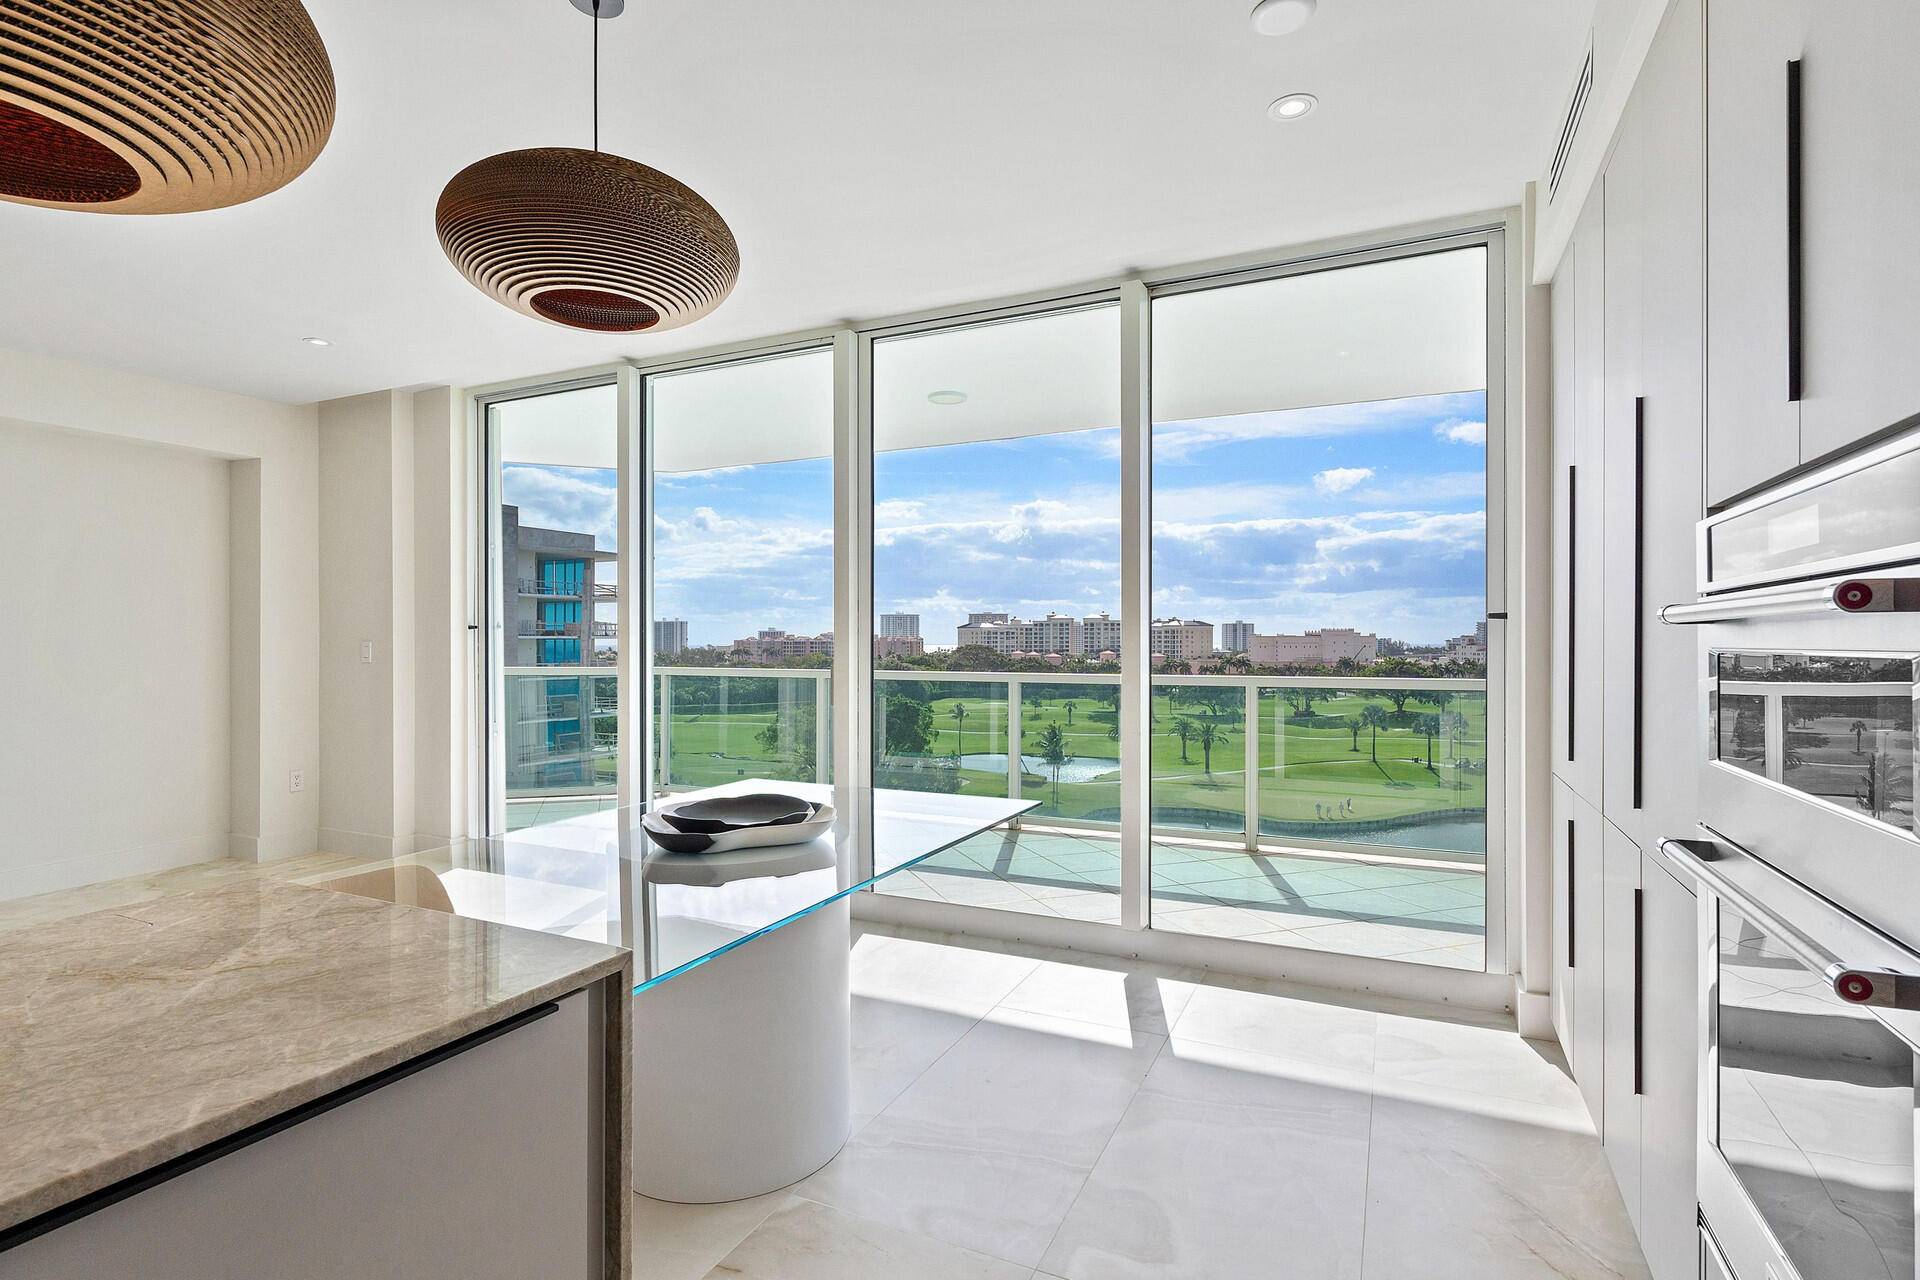 UNFURNISHED ANNUAL BREATHTAKING DIRECT GOLF COURSE VIEWS FROM THIS 7TH FLOOR STUNNING RESIDENCE.